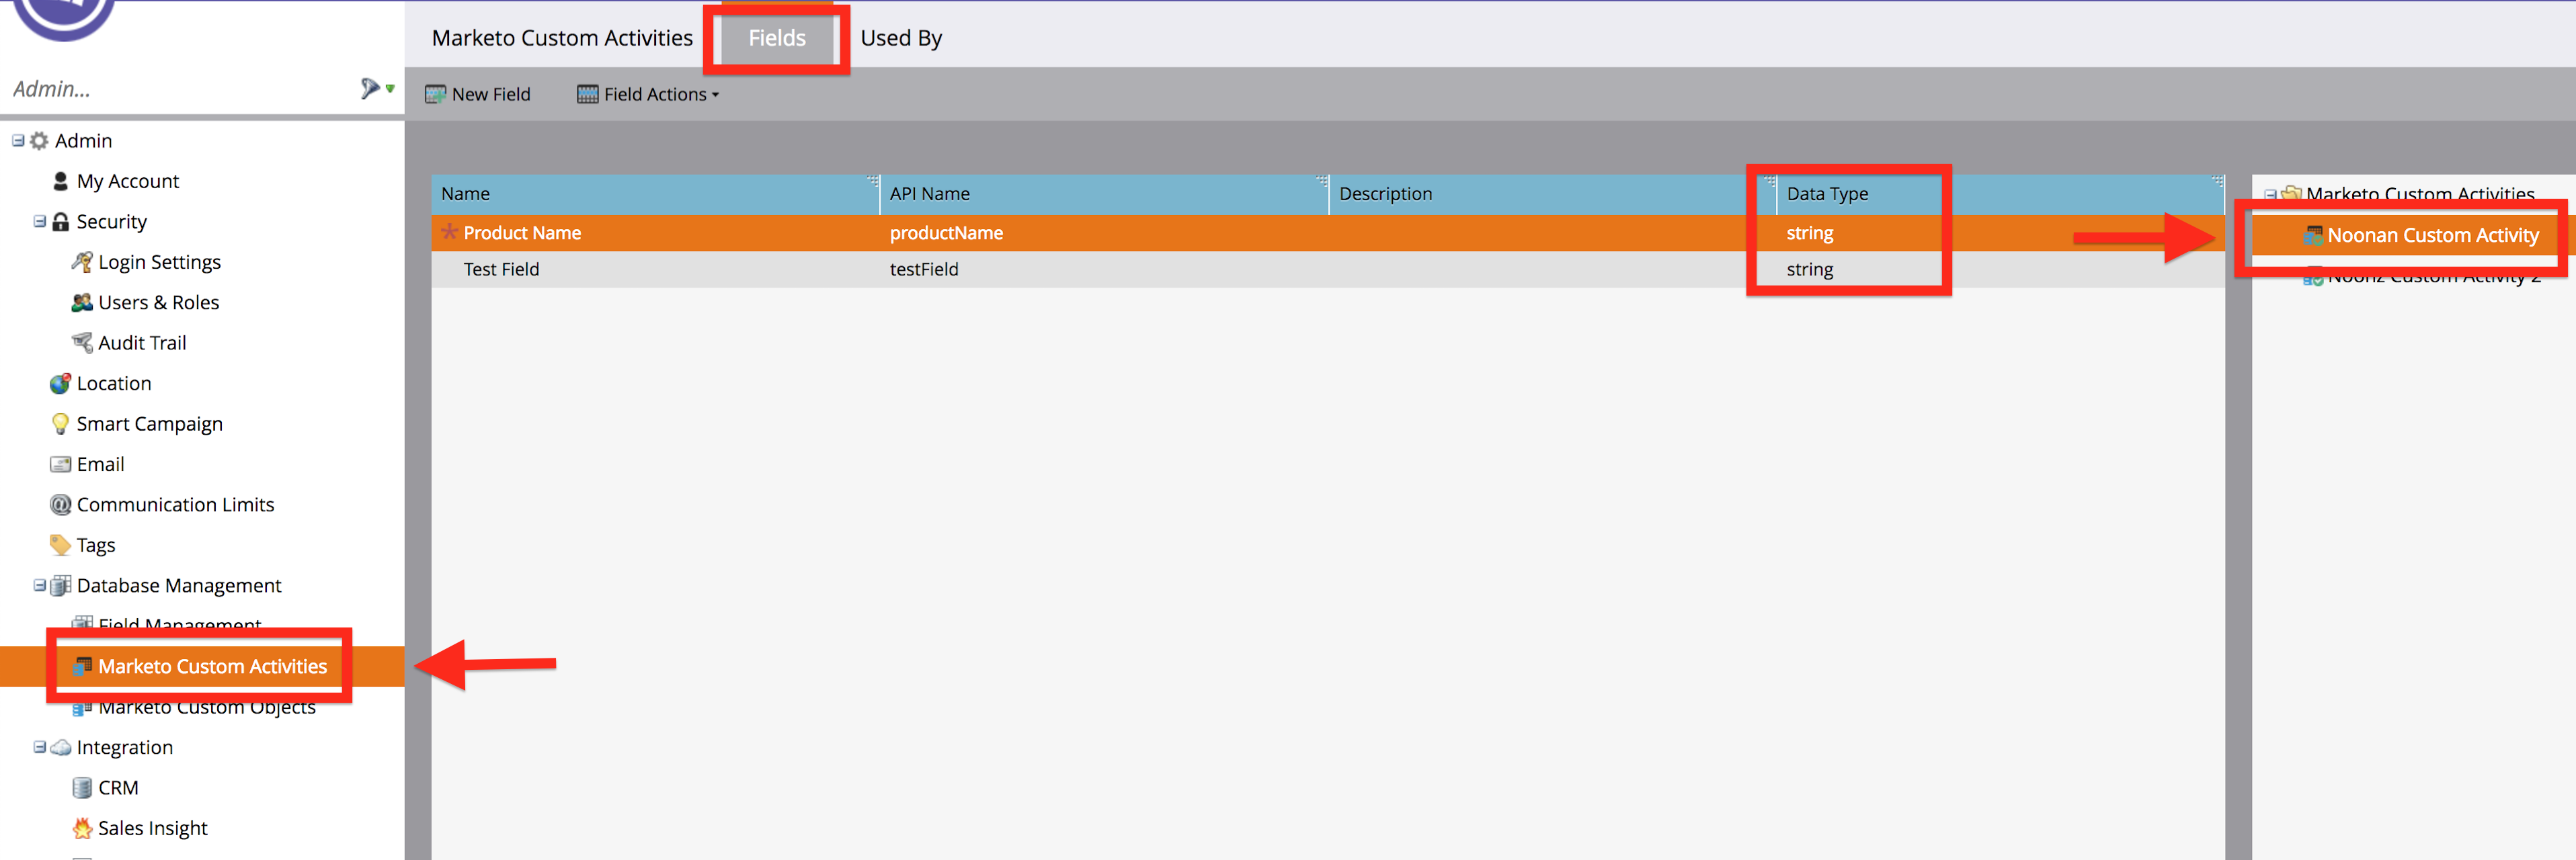 A screenshot of the Fields tab inside of the Marketo Custom Activities page.